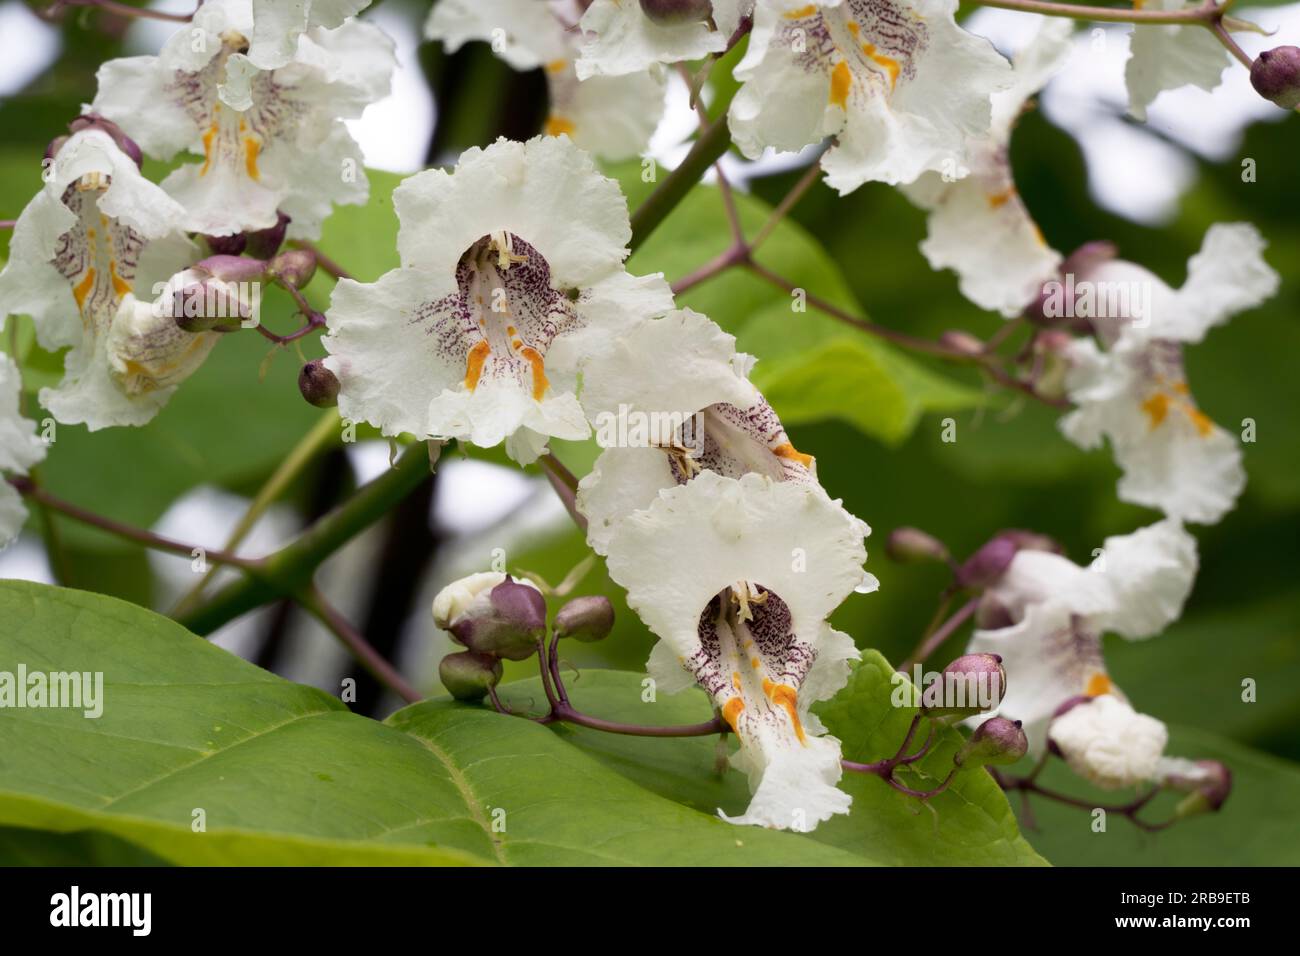 Delicate pretty little flower of the beautiful Catalpa Indian bean tree Stock Photo